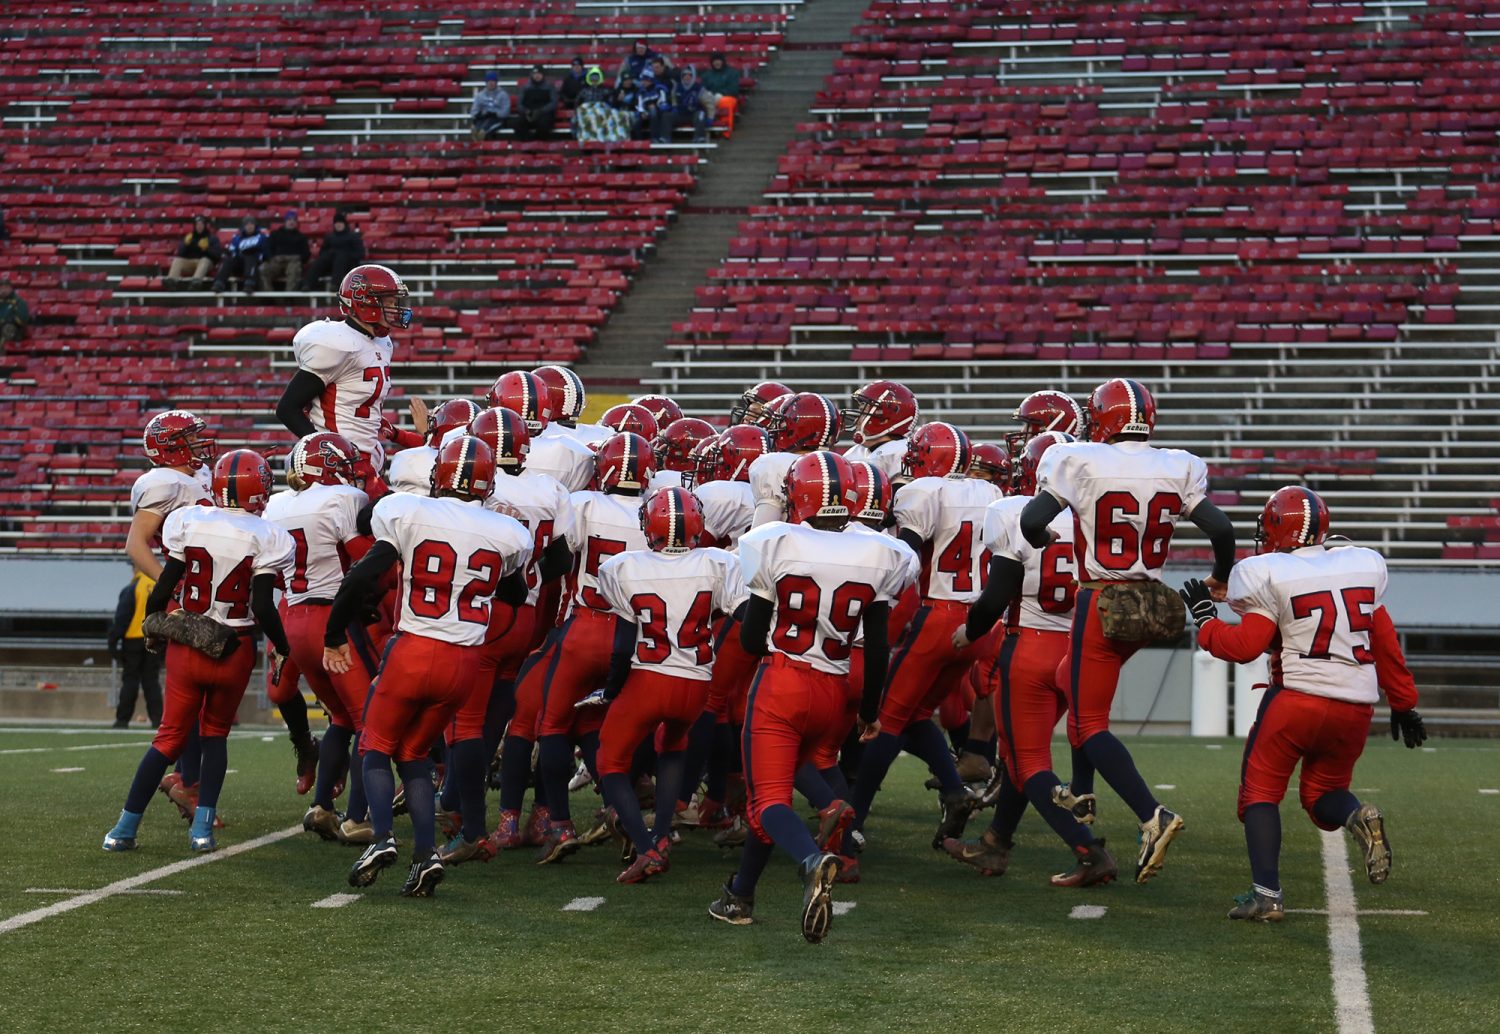 Spencer/Columbus' Dakota Andreae jumps above his teammates as the Rockets were introduced before losing to Amherst 42-0 in the WIAA Division 5 State Championship Game at Camp Randall Stadium in Madison, Thursday, Nov. 19, 2015.